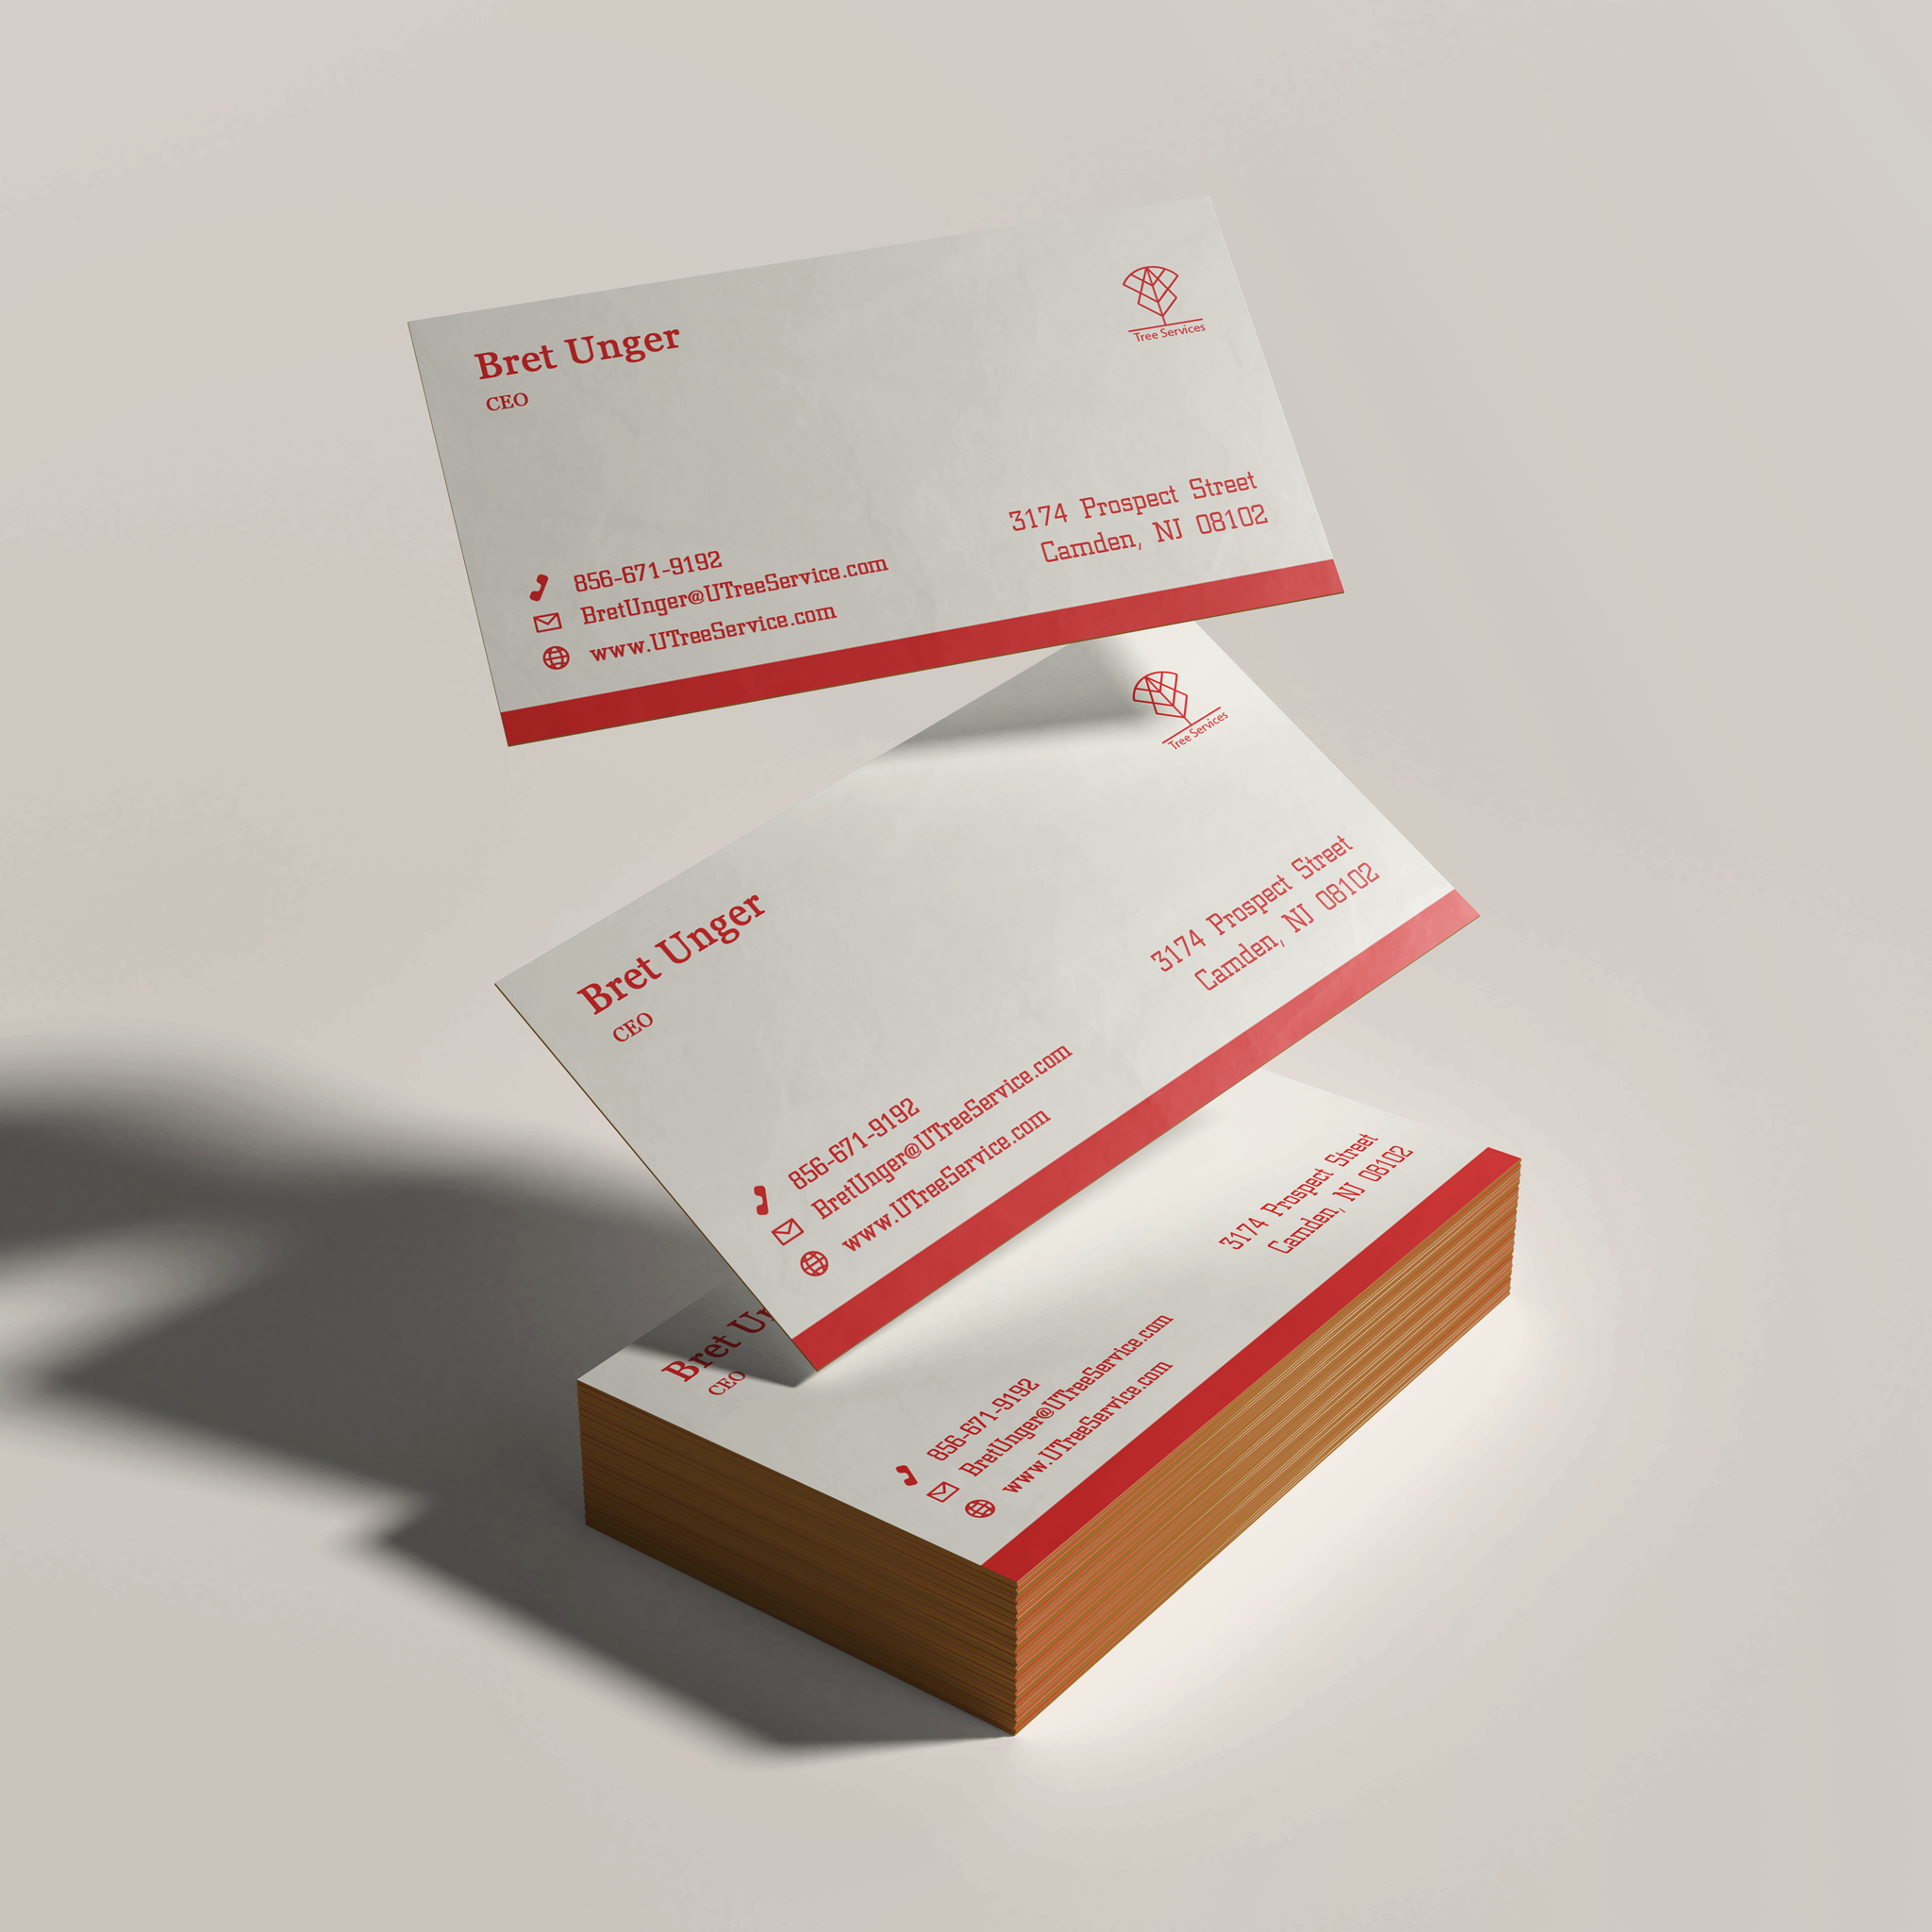 2.5 x 2.5 32pt uncoated painted edge business cards 